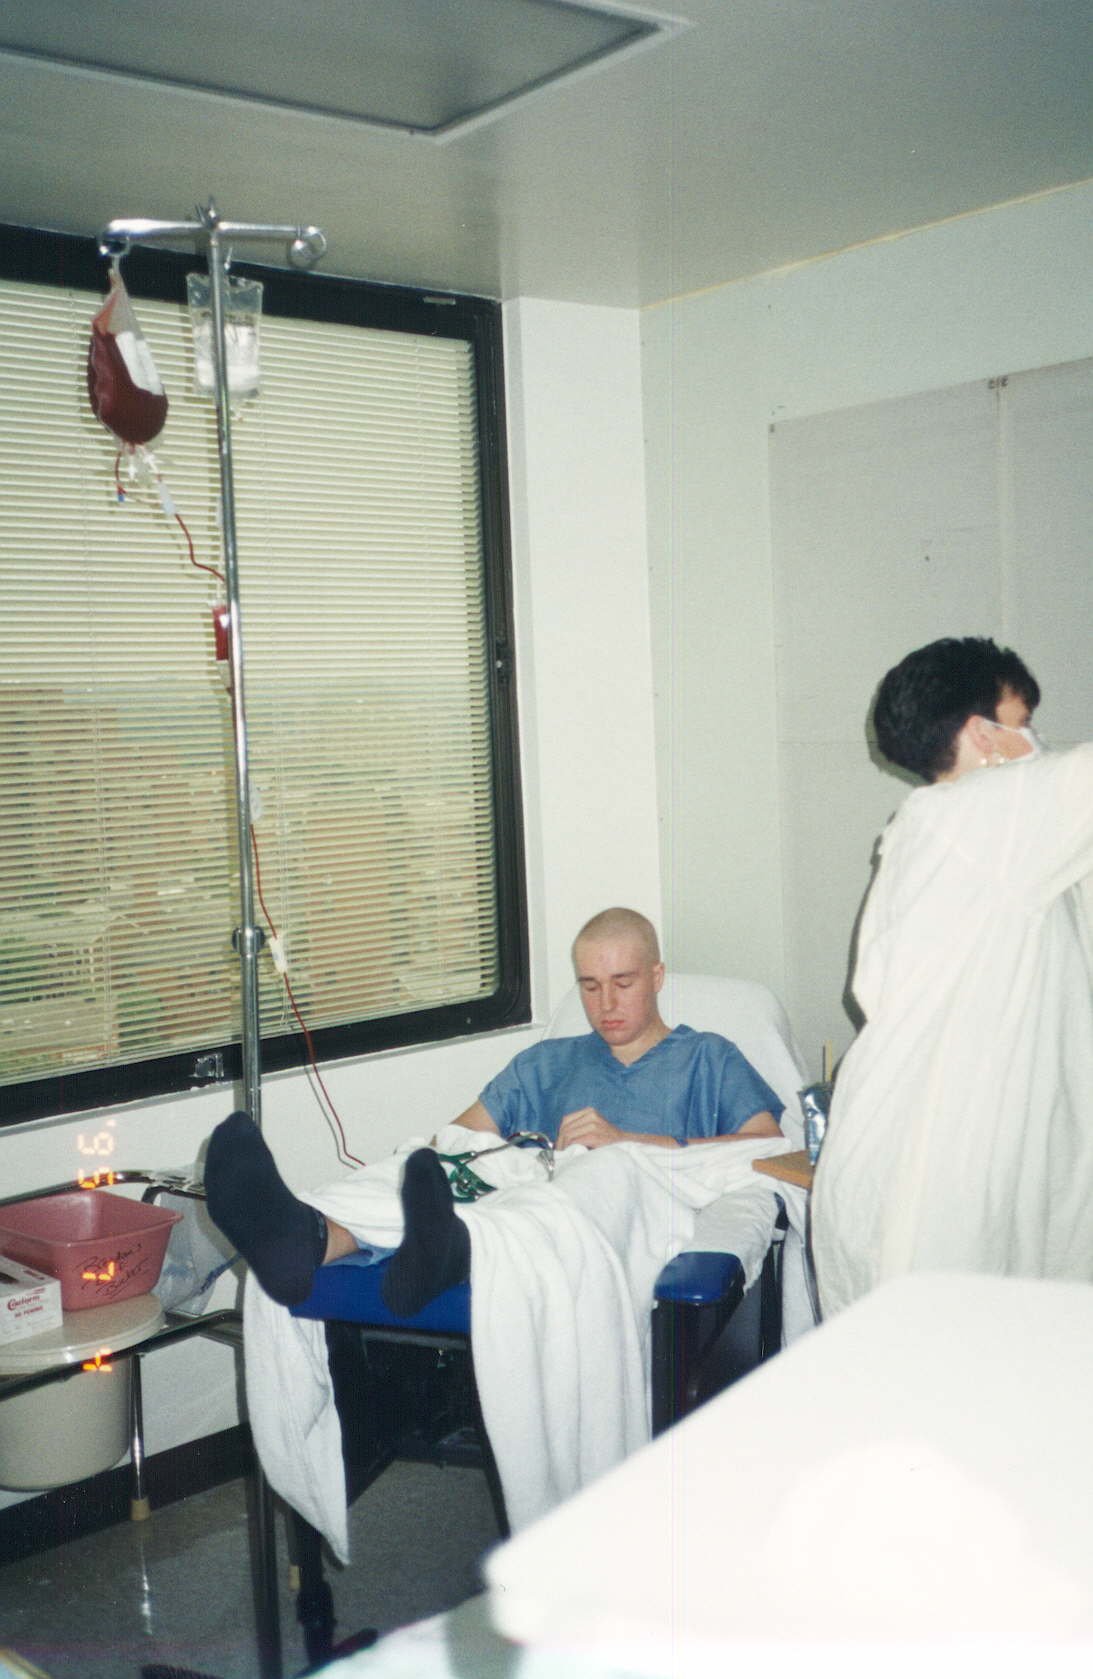  “After all the chemotherapy and radiation, the transplant was easy. An hour sitting in a chair as the bone marrow was transfused into my arm. Then weeks of waiting to see if enough hematopoietic stem cells that were in the marrow made the journey in